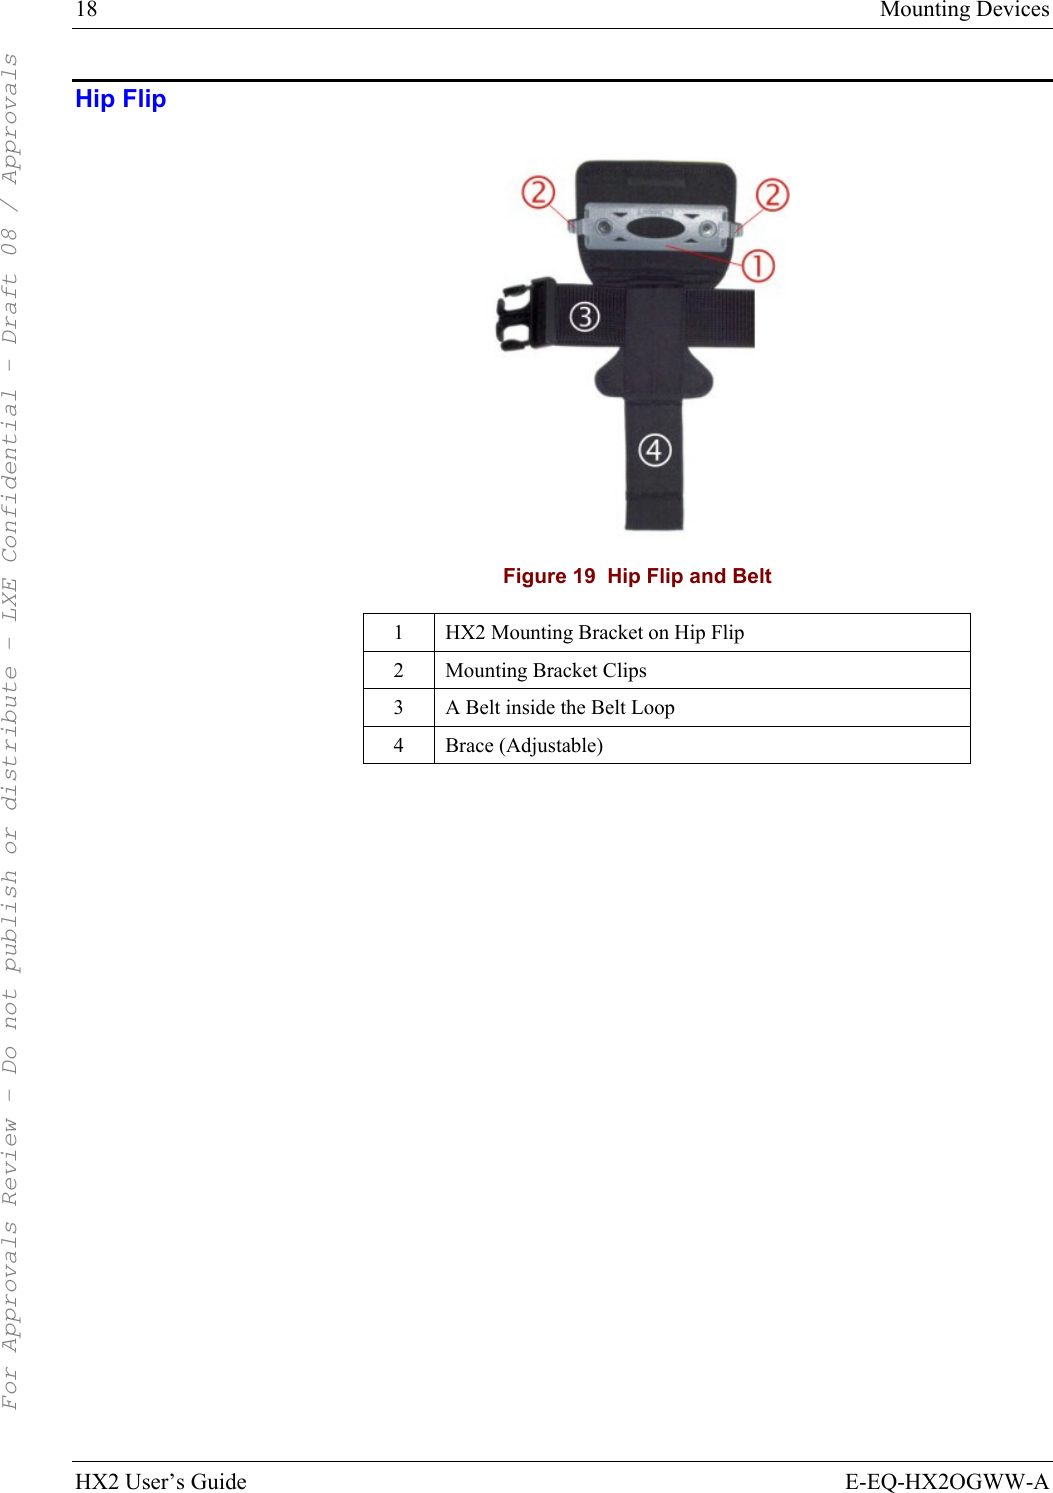 18  Mounting Devices HX2 User’s Guide  E-EQ-HX2OGWW-A Hip Flip  Figure 19  Hip Flip and Belt 1  HX2 Mounting Bracket on Hip Flip 2  Mounting Bracket Clips 3  A Belt inside the Belt Loop 4  Brace (Adjustable)     For Approvals Review - Do not publish or distribute - LXE Confidential - Draft 08 / Approvals